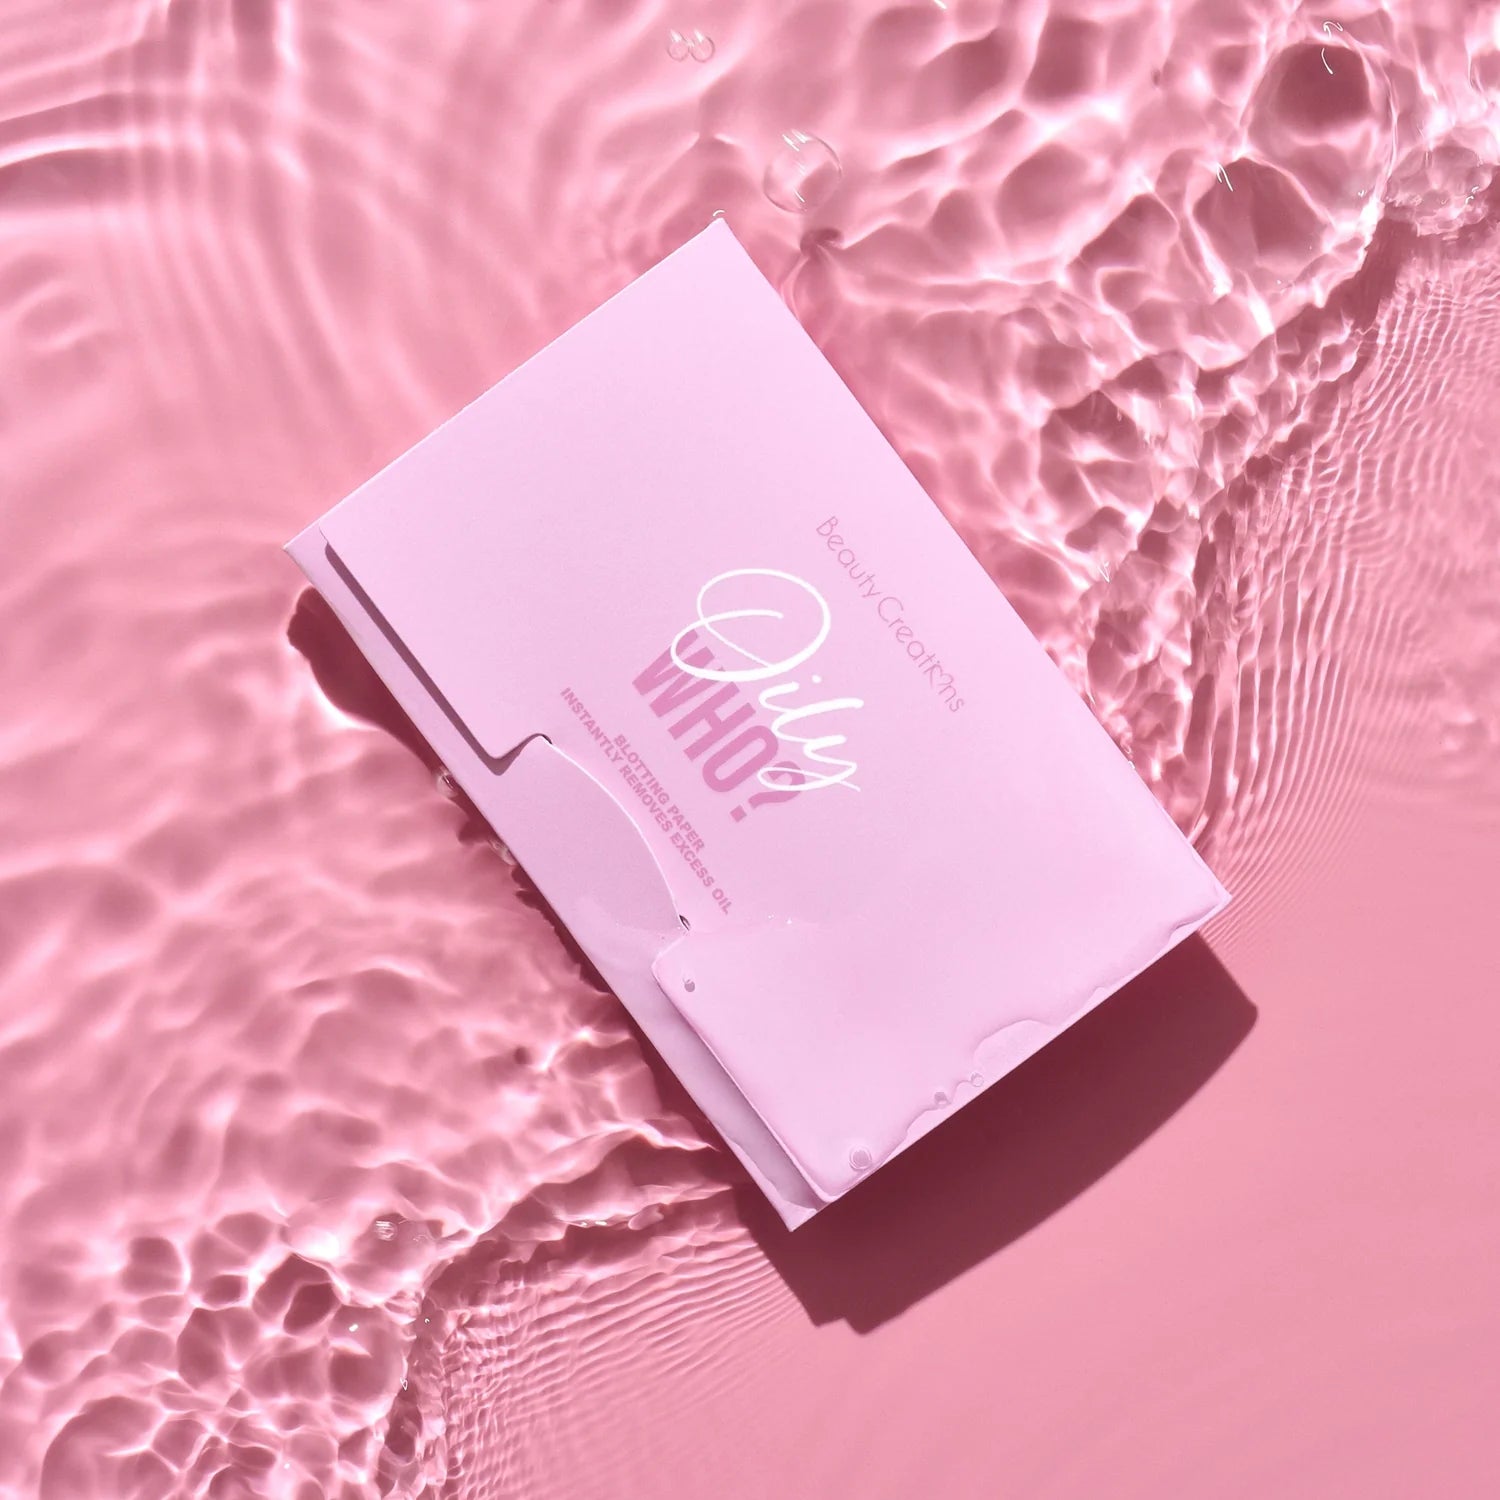 Beauty Creations - Oily Who? Blotting Paper